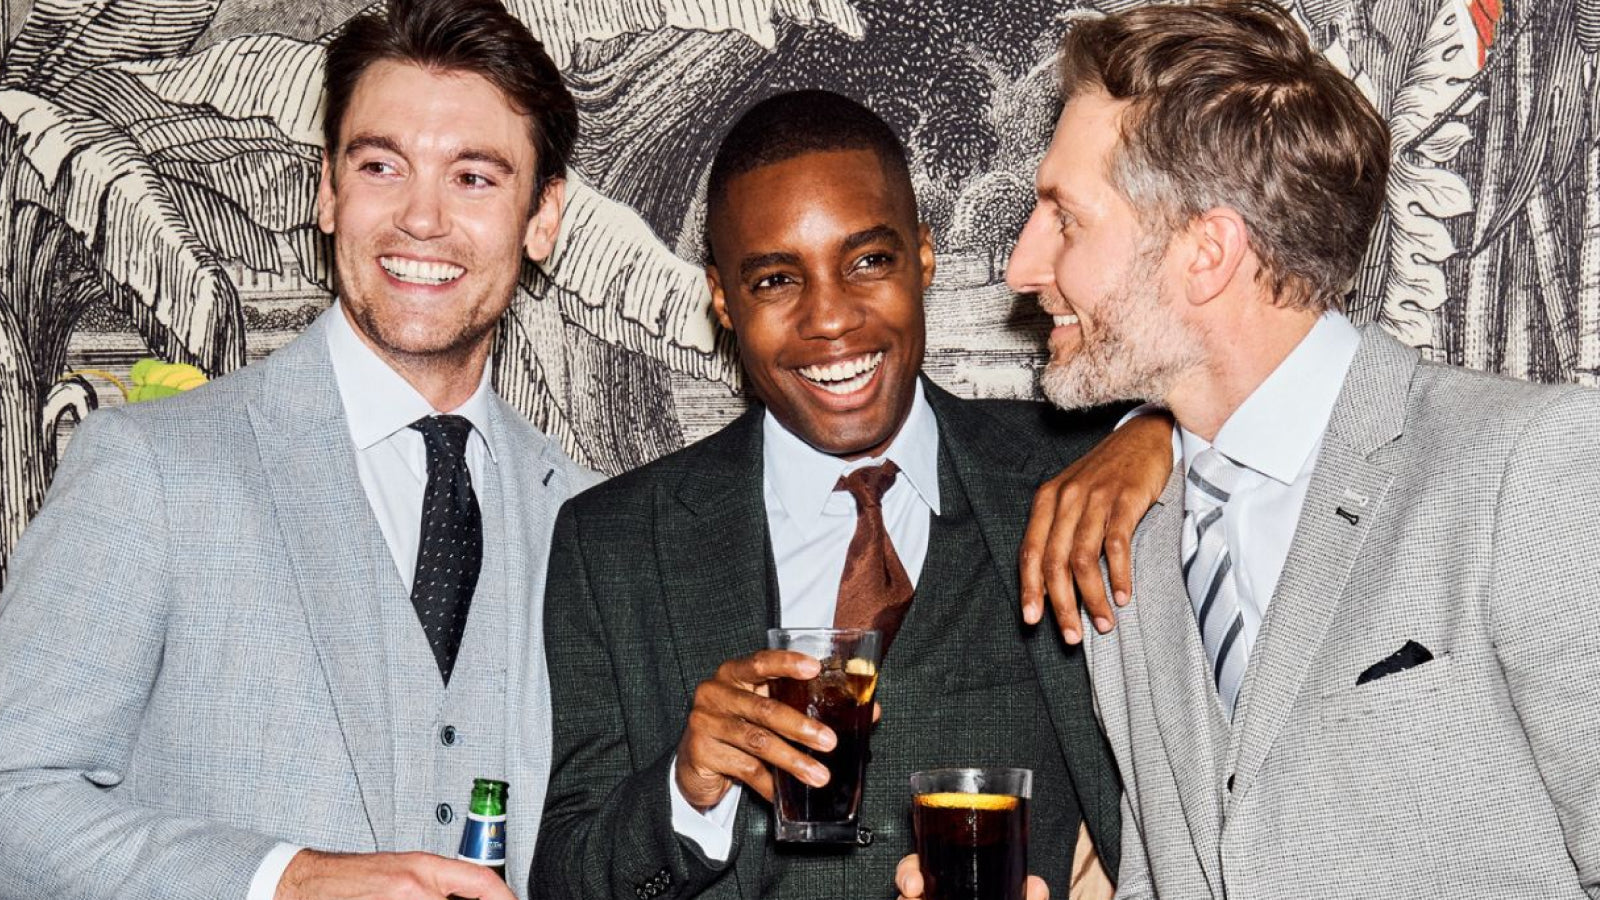 Men's festive style guide: Suiting up for the holiday season